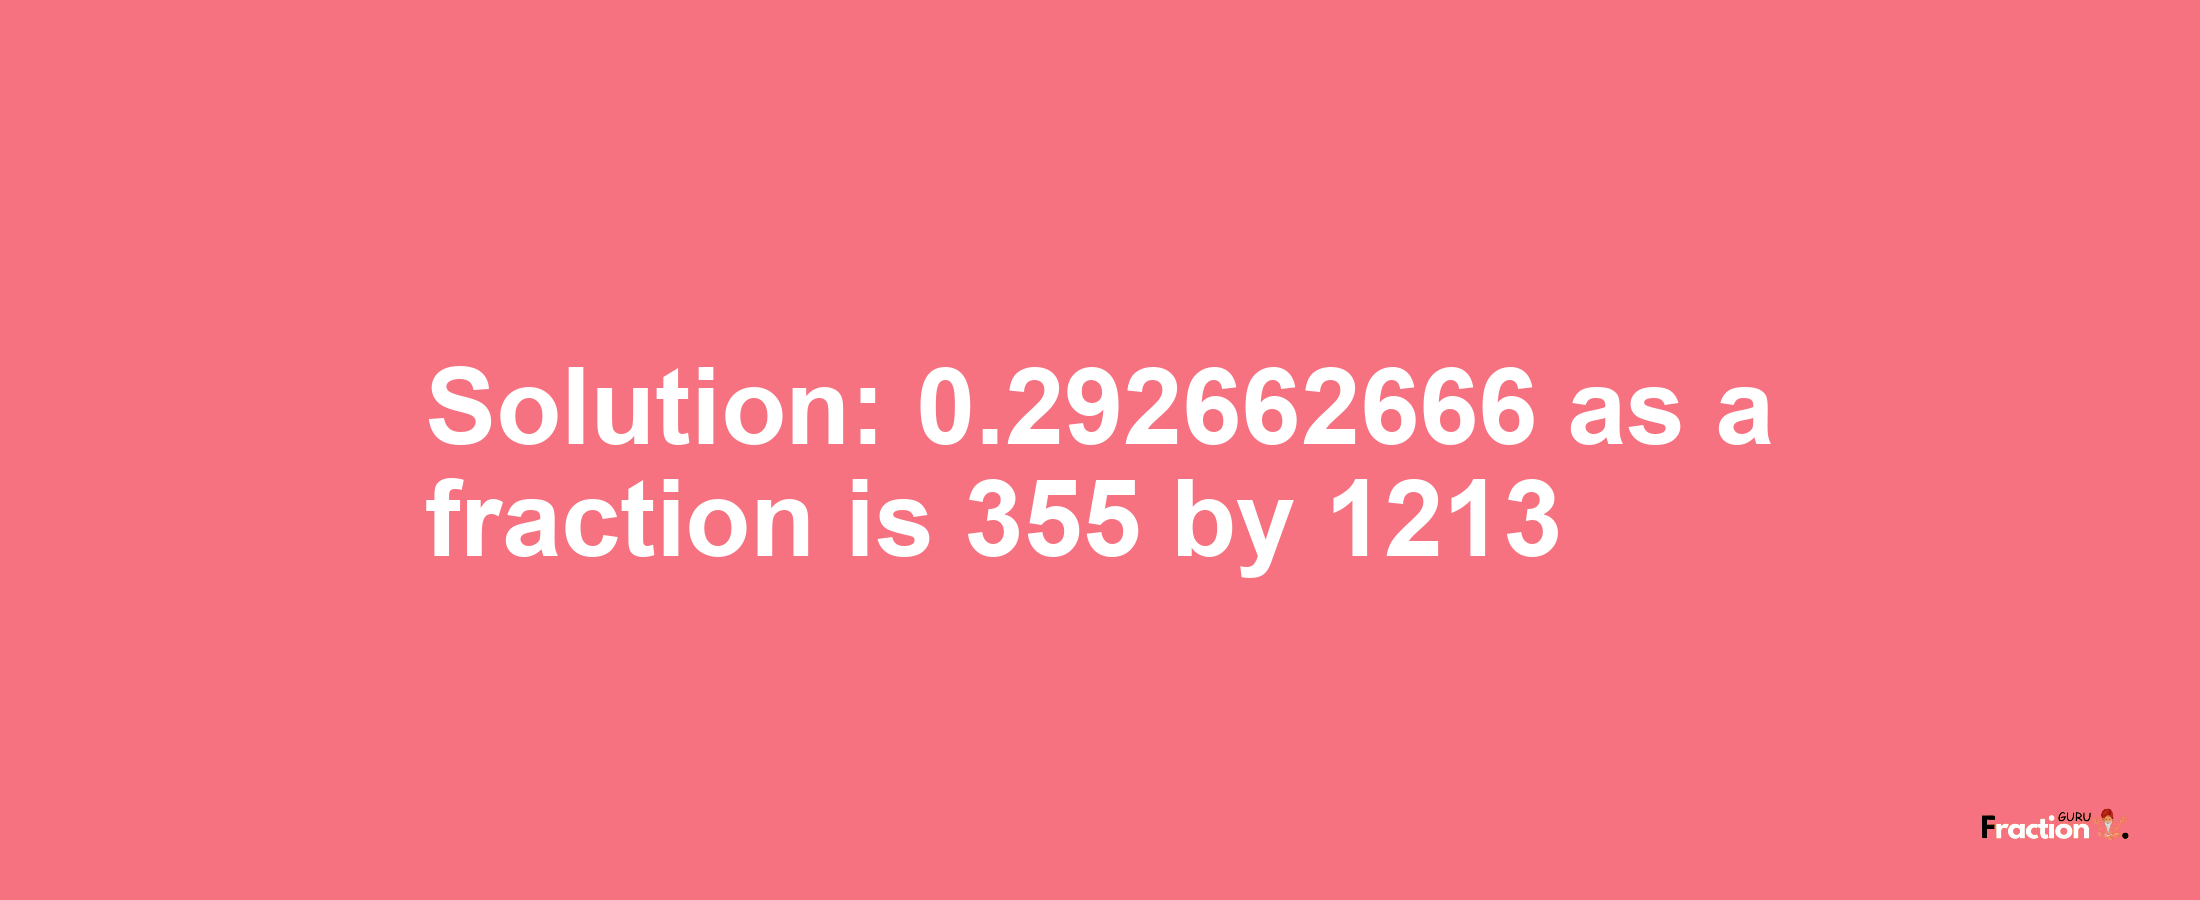 Solution:0.292662666 as a fraction is 355/1213